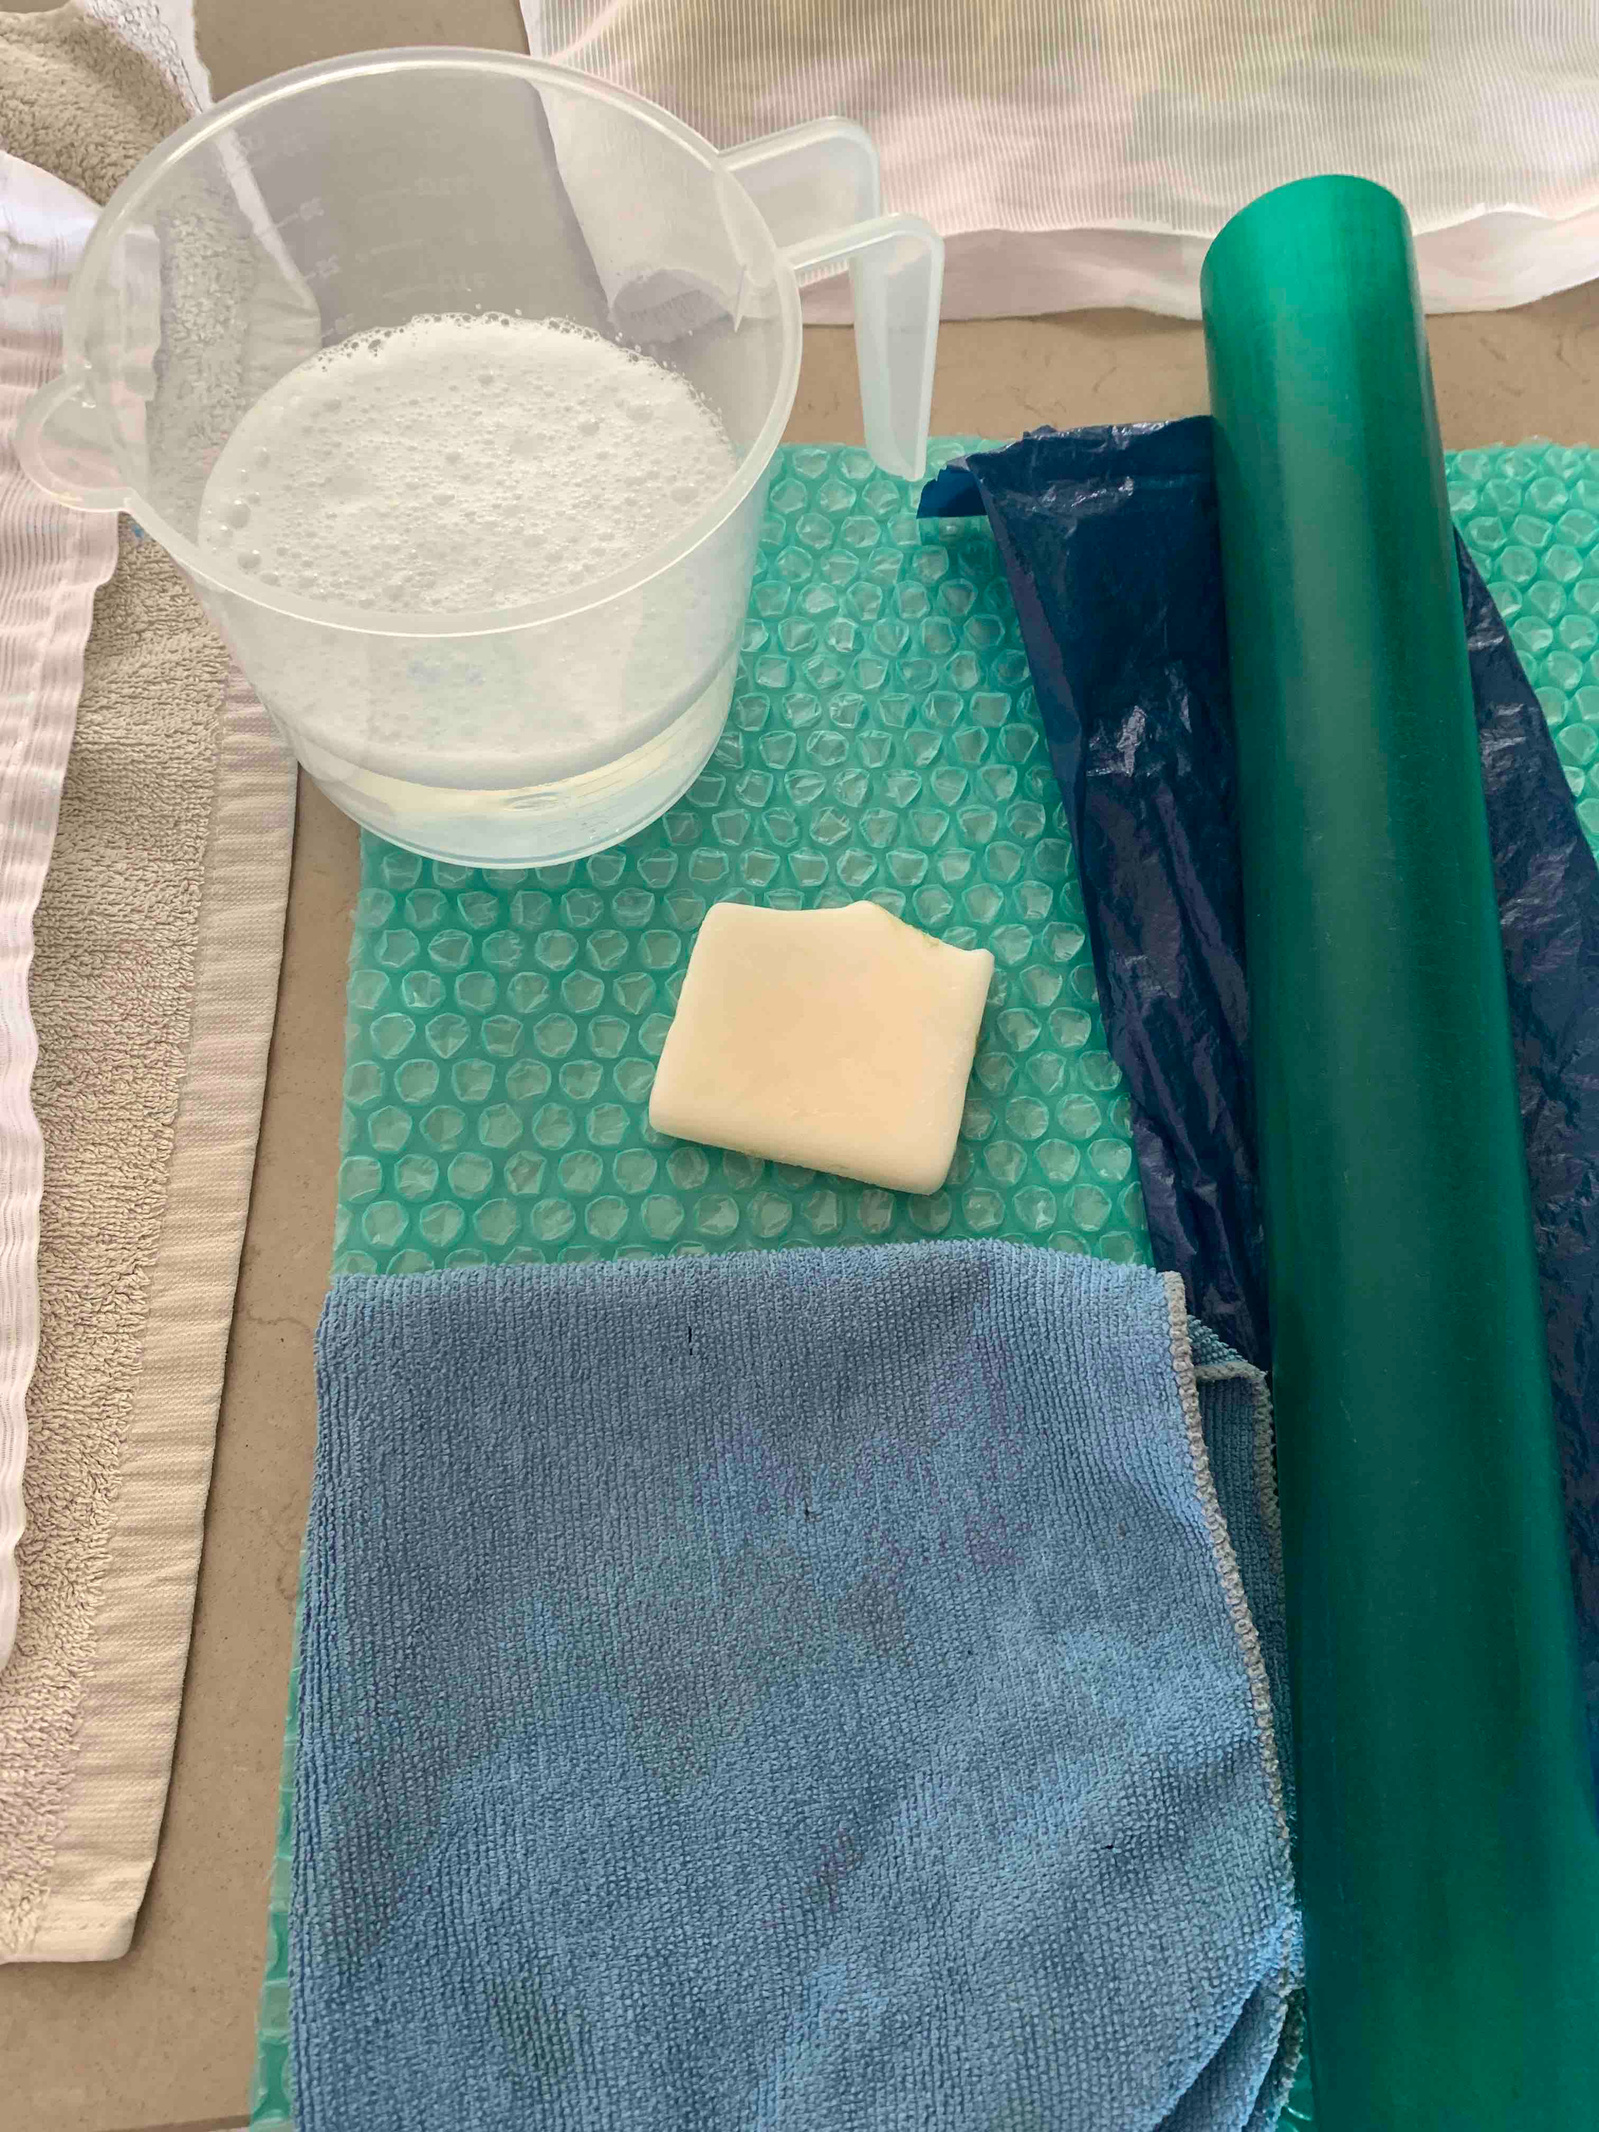 What is wet felting, and what equipment do I need to do it. Basic equipment, often found at home can be used to create wet felt. Lynn Comley recommends using inexpensive recycled or repurposed equipment when you first learn how to wet felt.